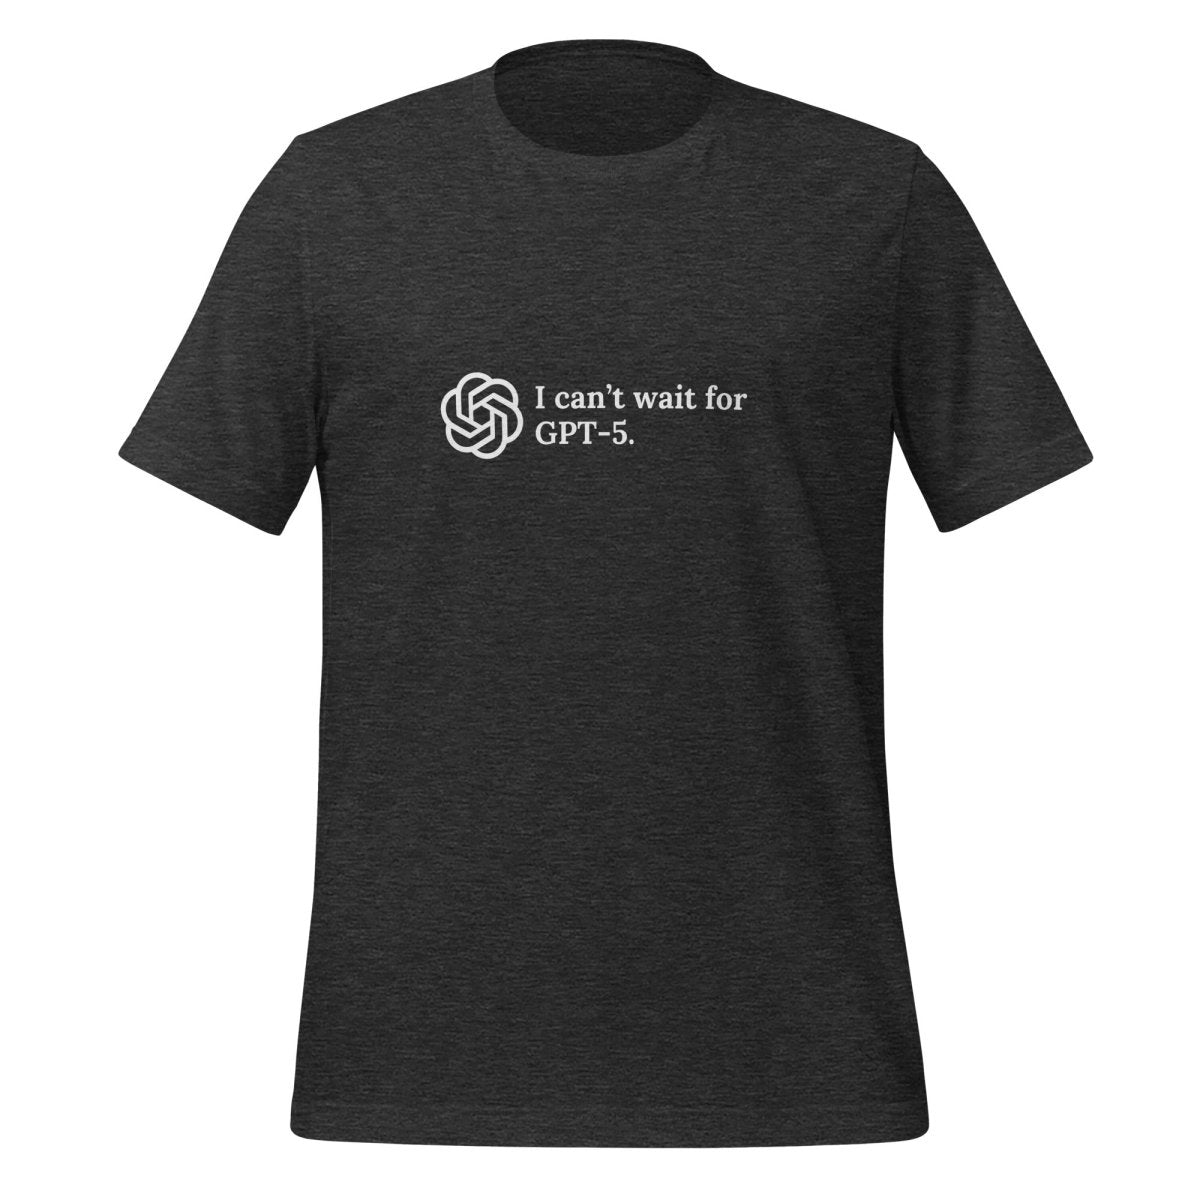 I can't wait for GPT - 5. T - Shirt (unisex) - Dark Grey Heather - AI Store